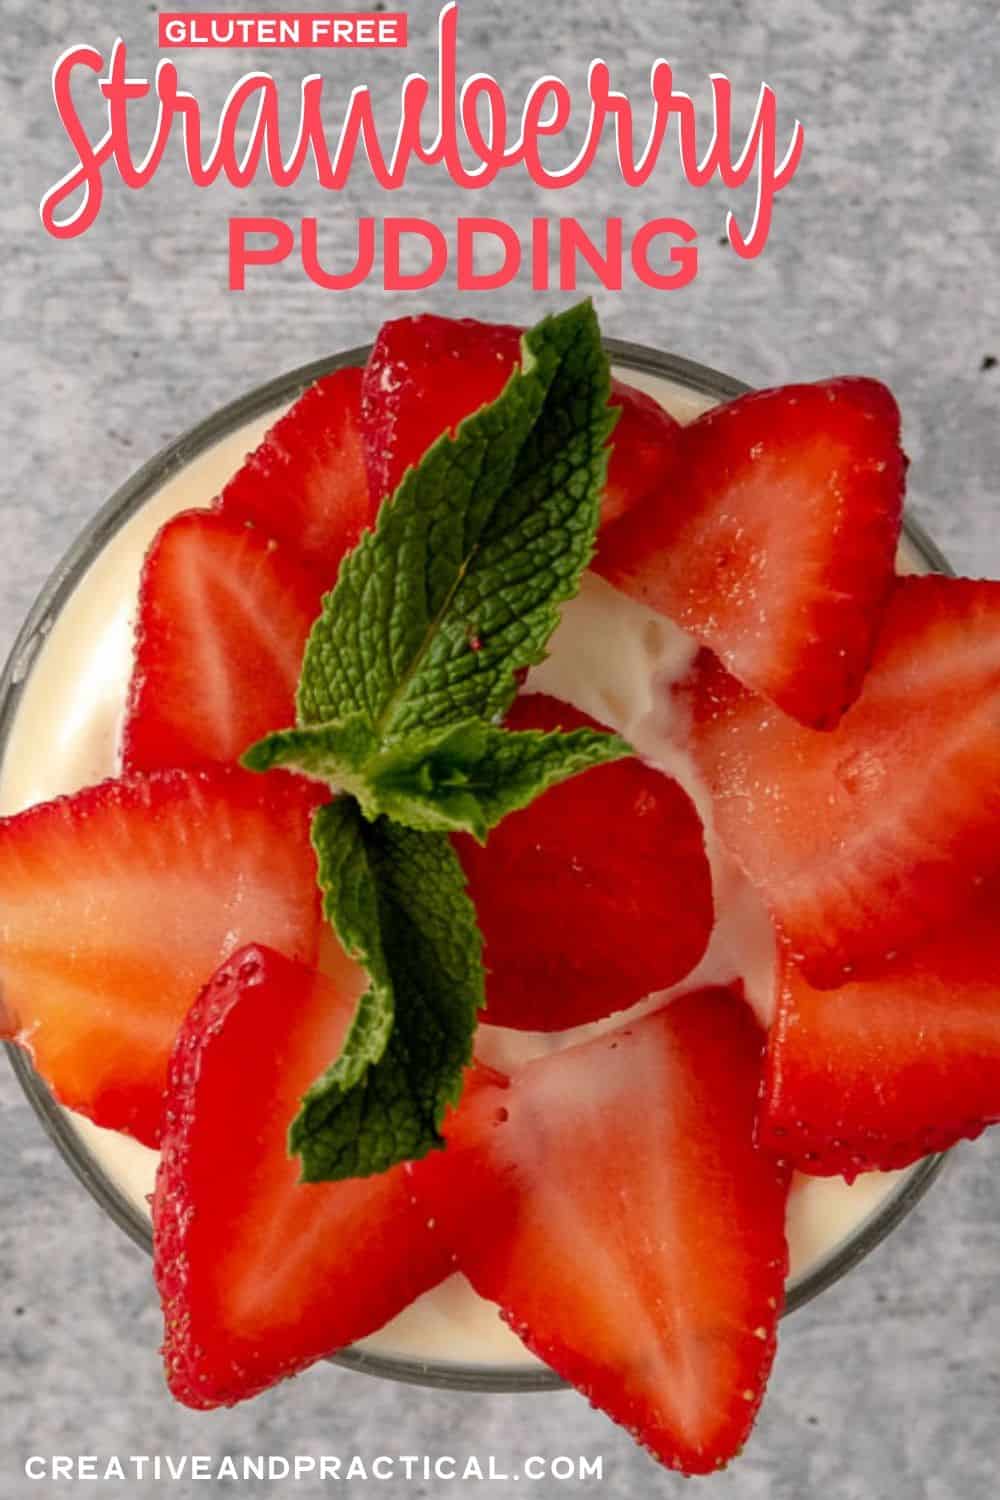 Perfect for Dessert! Bowl of Strawberry Pudding.